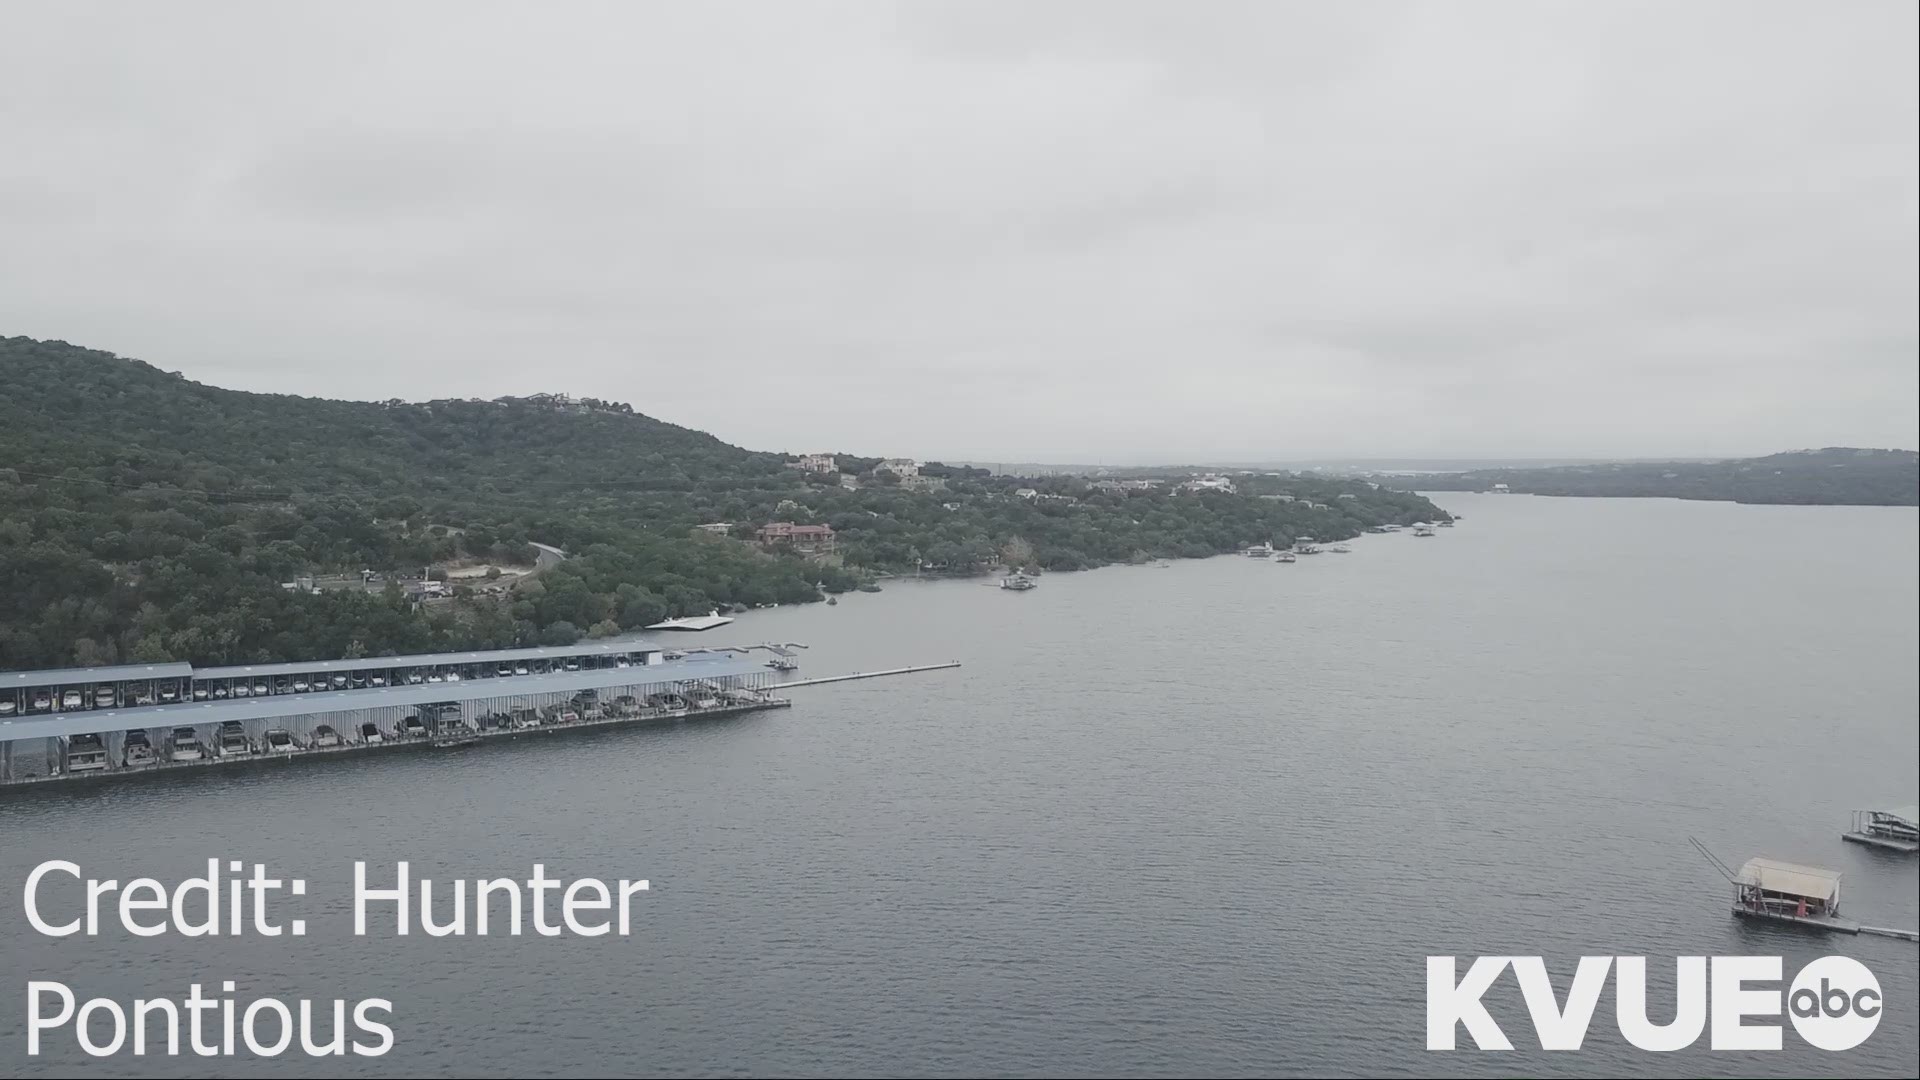 KVUE has covered the effect rising Lake Travis waters has had on surrounding homeowners. Now we're getting a look at how the floodwaters have affected businesses along Lake Travis.